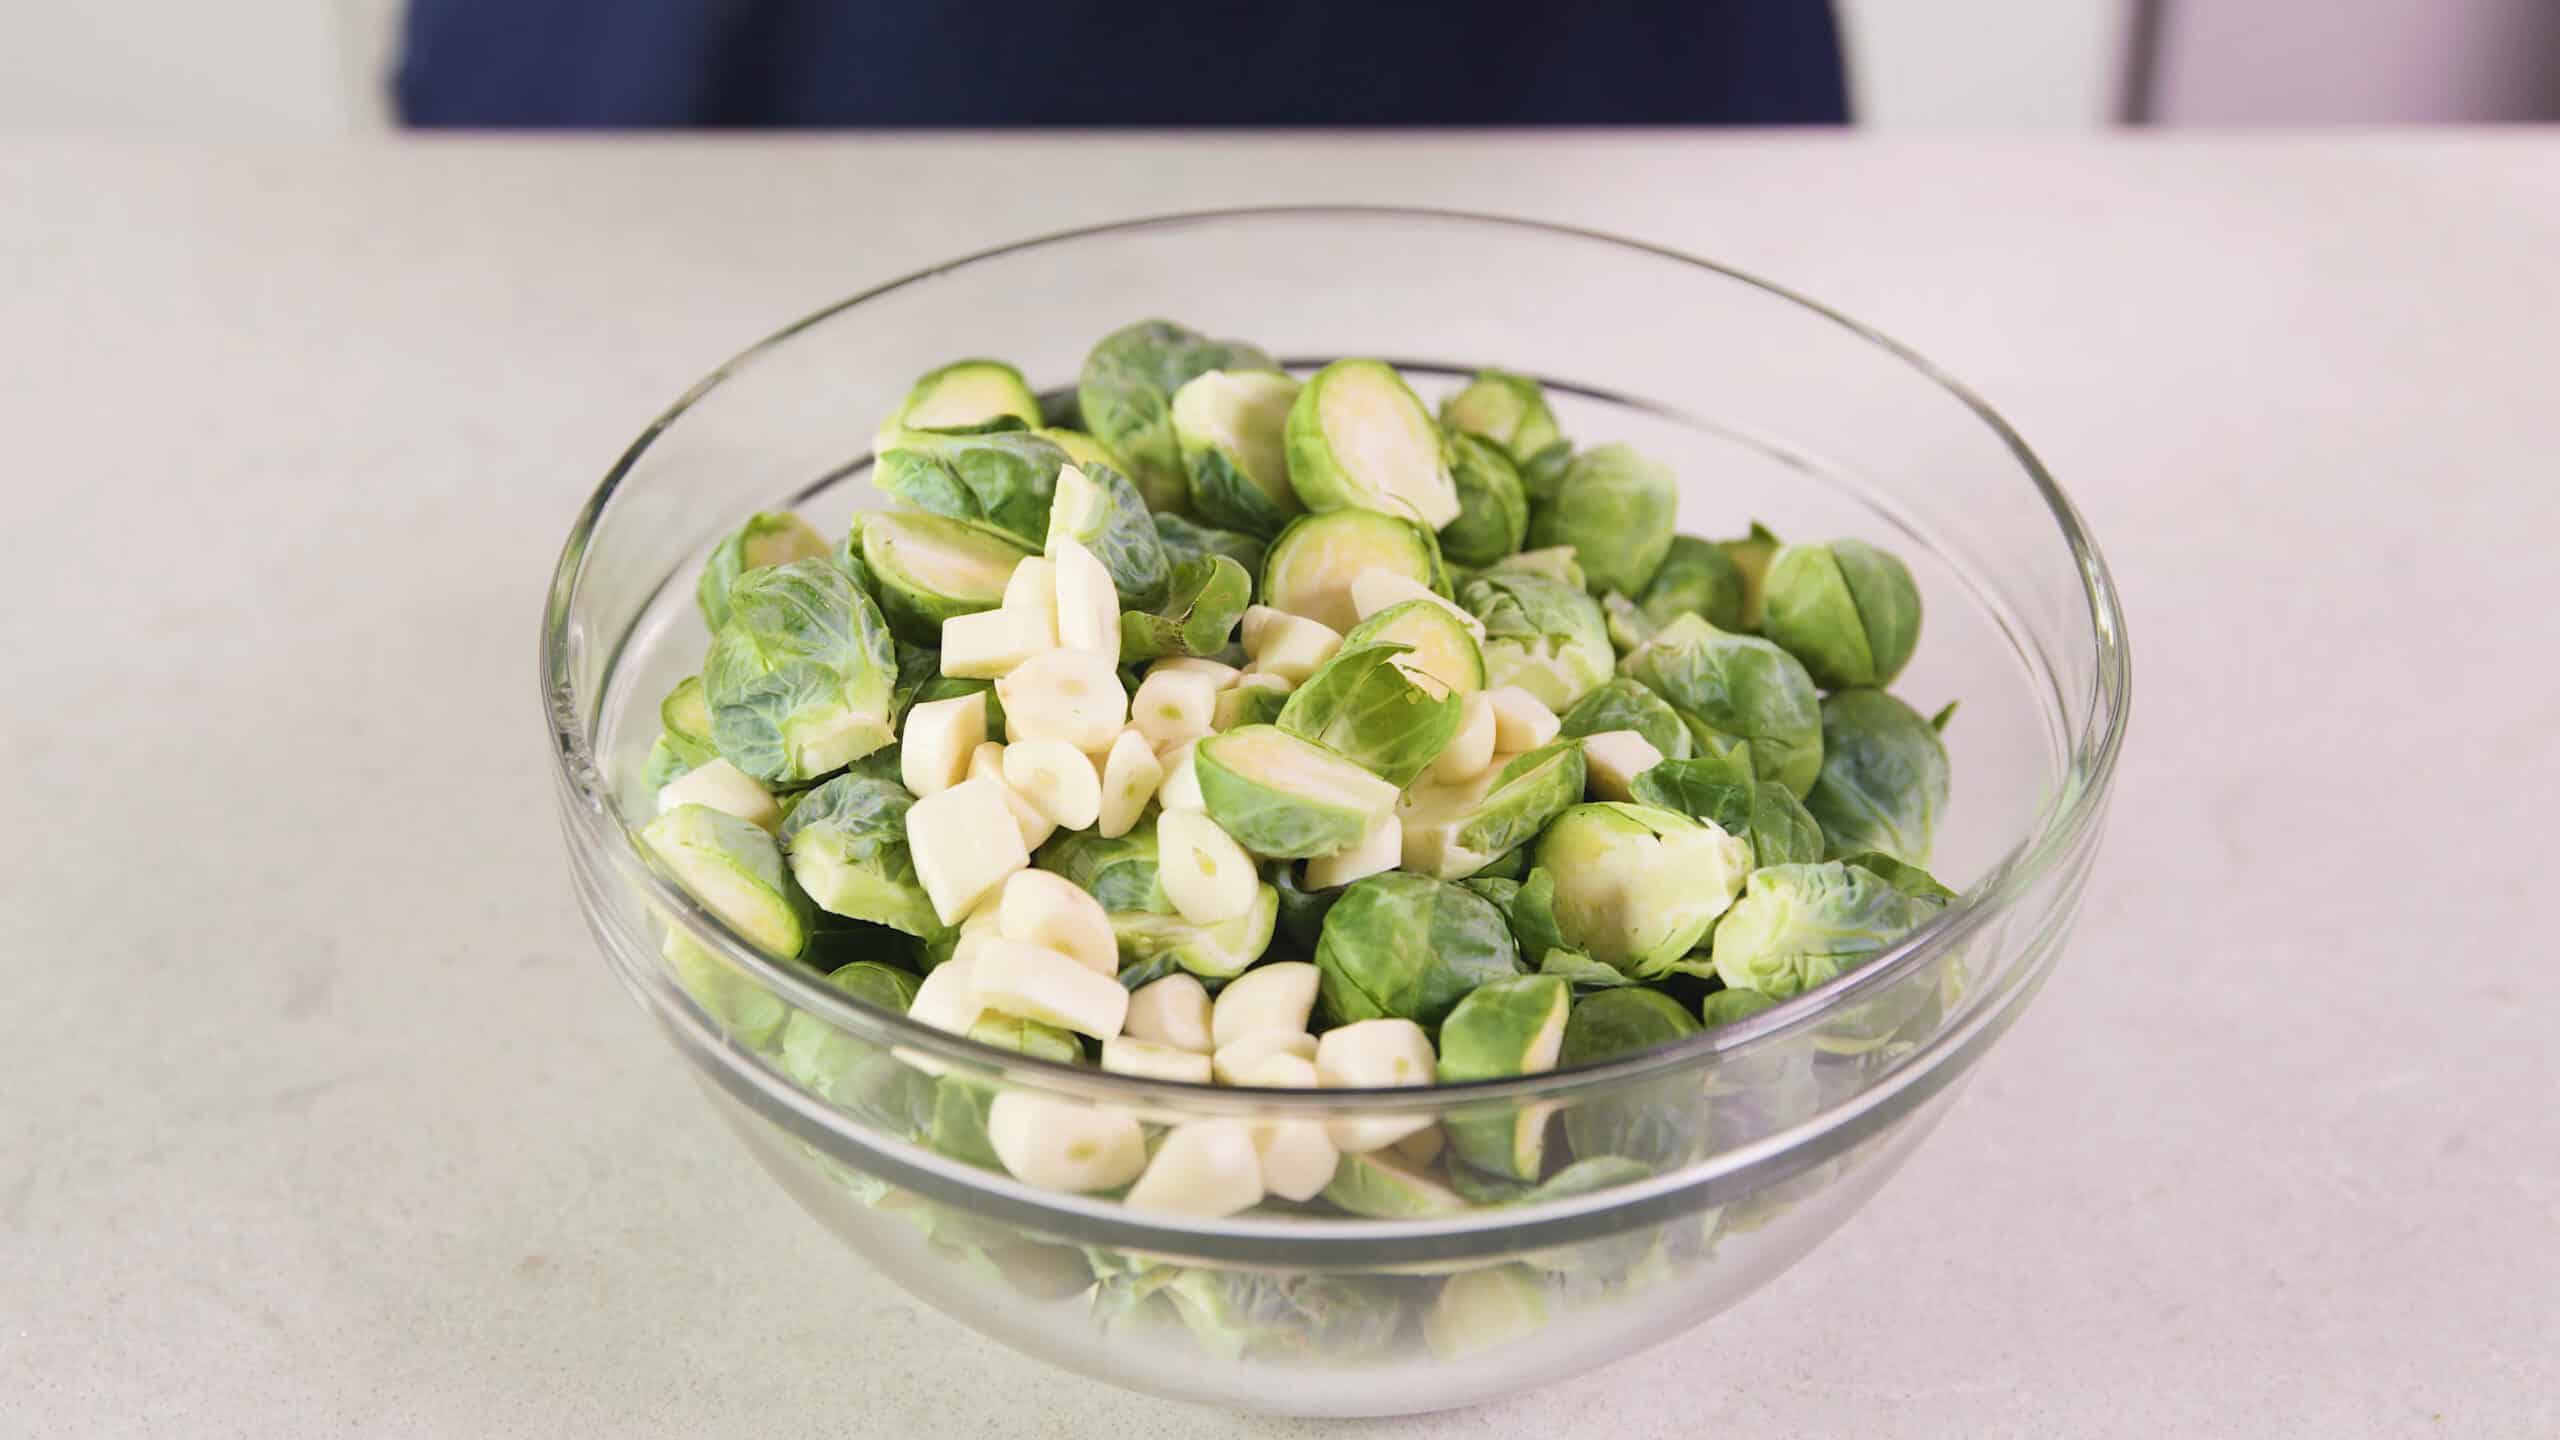 Angled view of large clear glass mixing bowl filled with sliced garlic and halved Brussel sprouts.